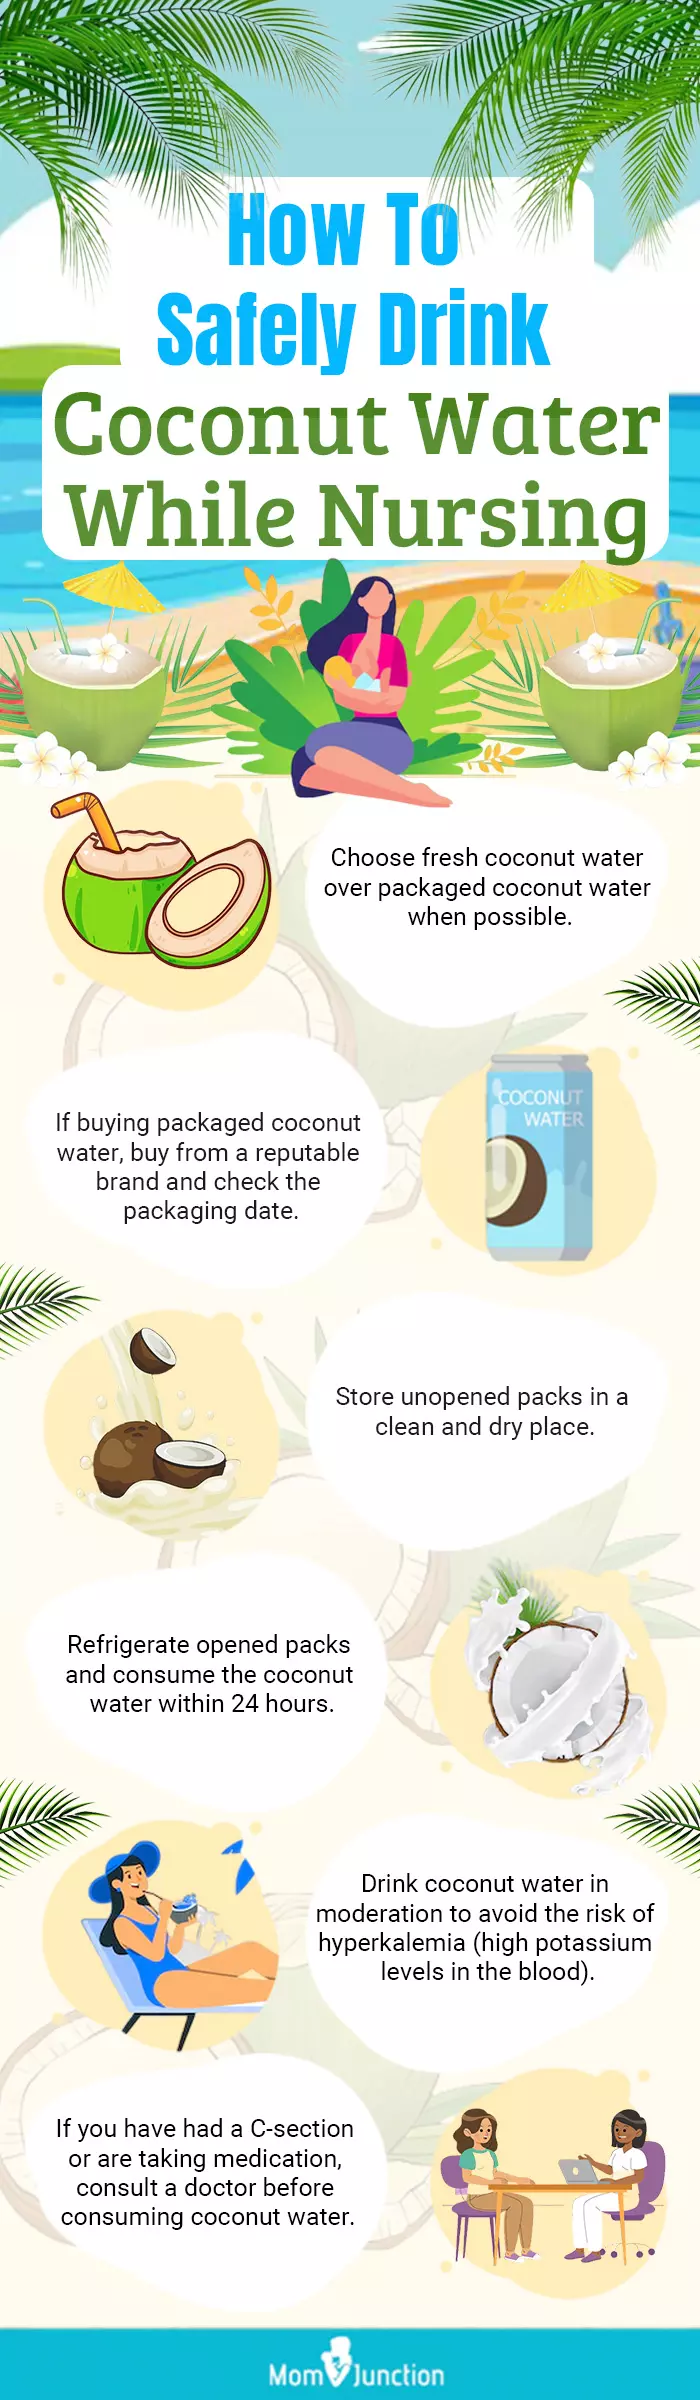 how to safely drink coconut water while nursing (infographic)